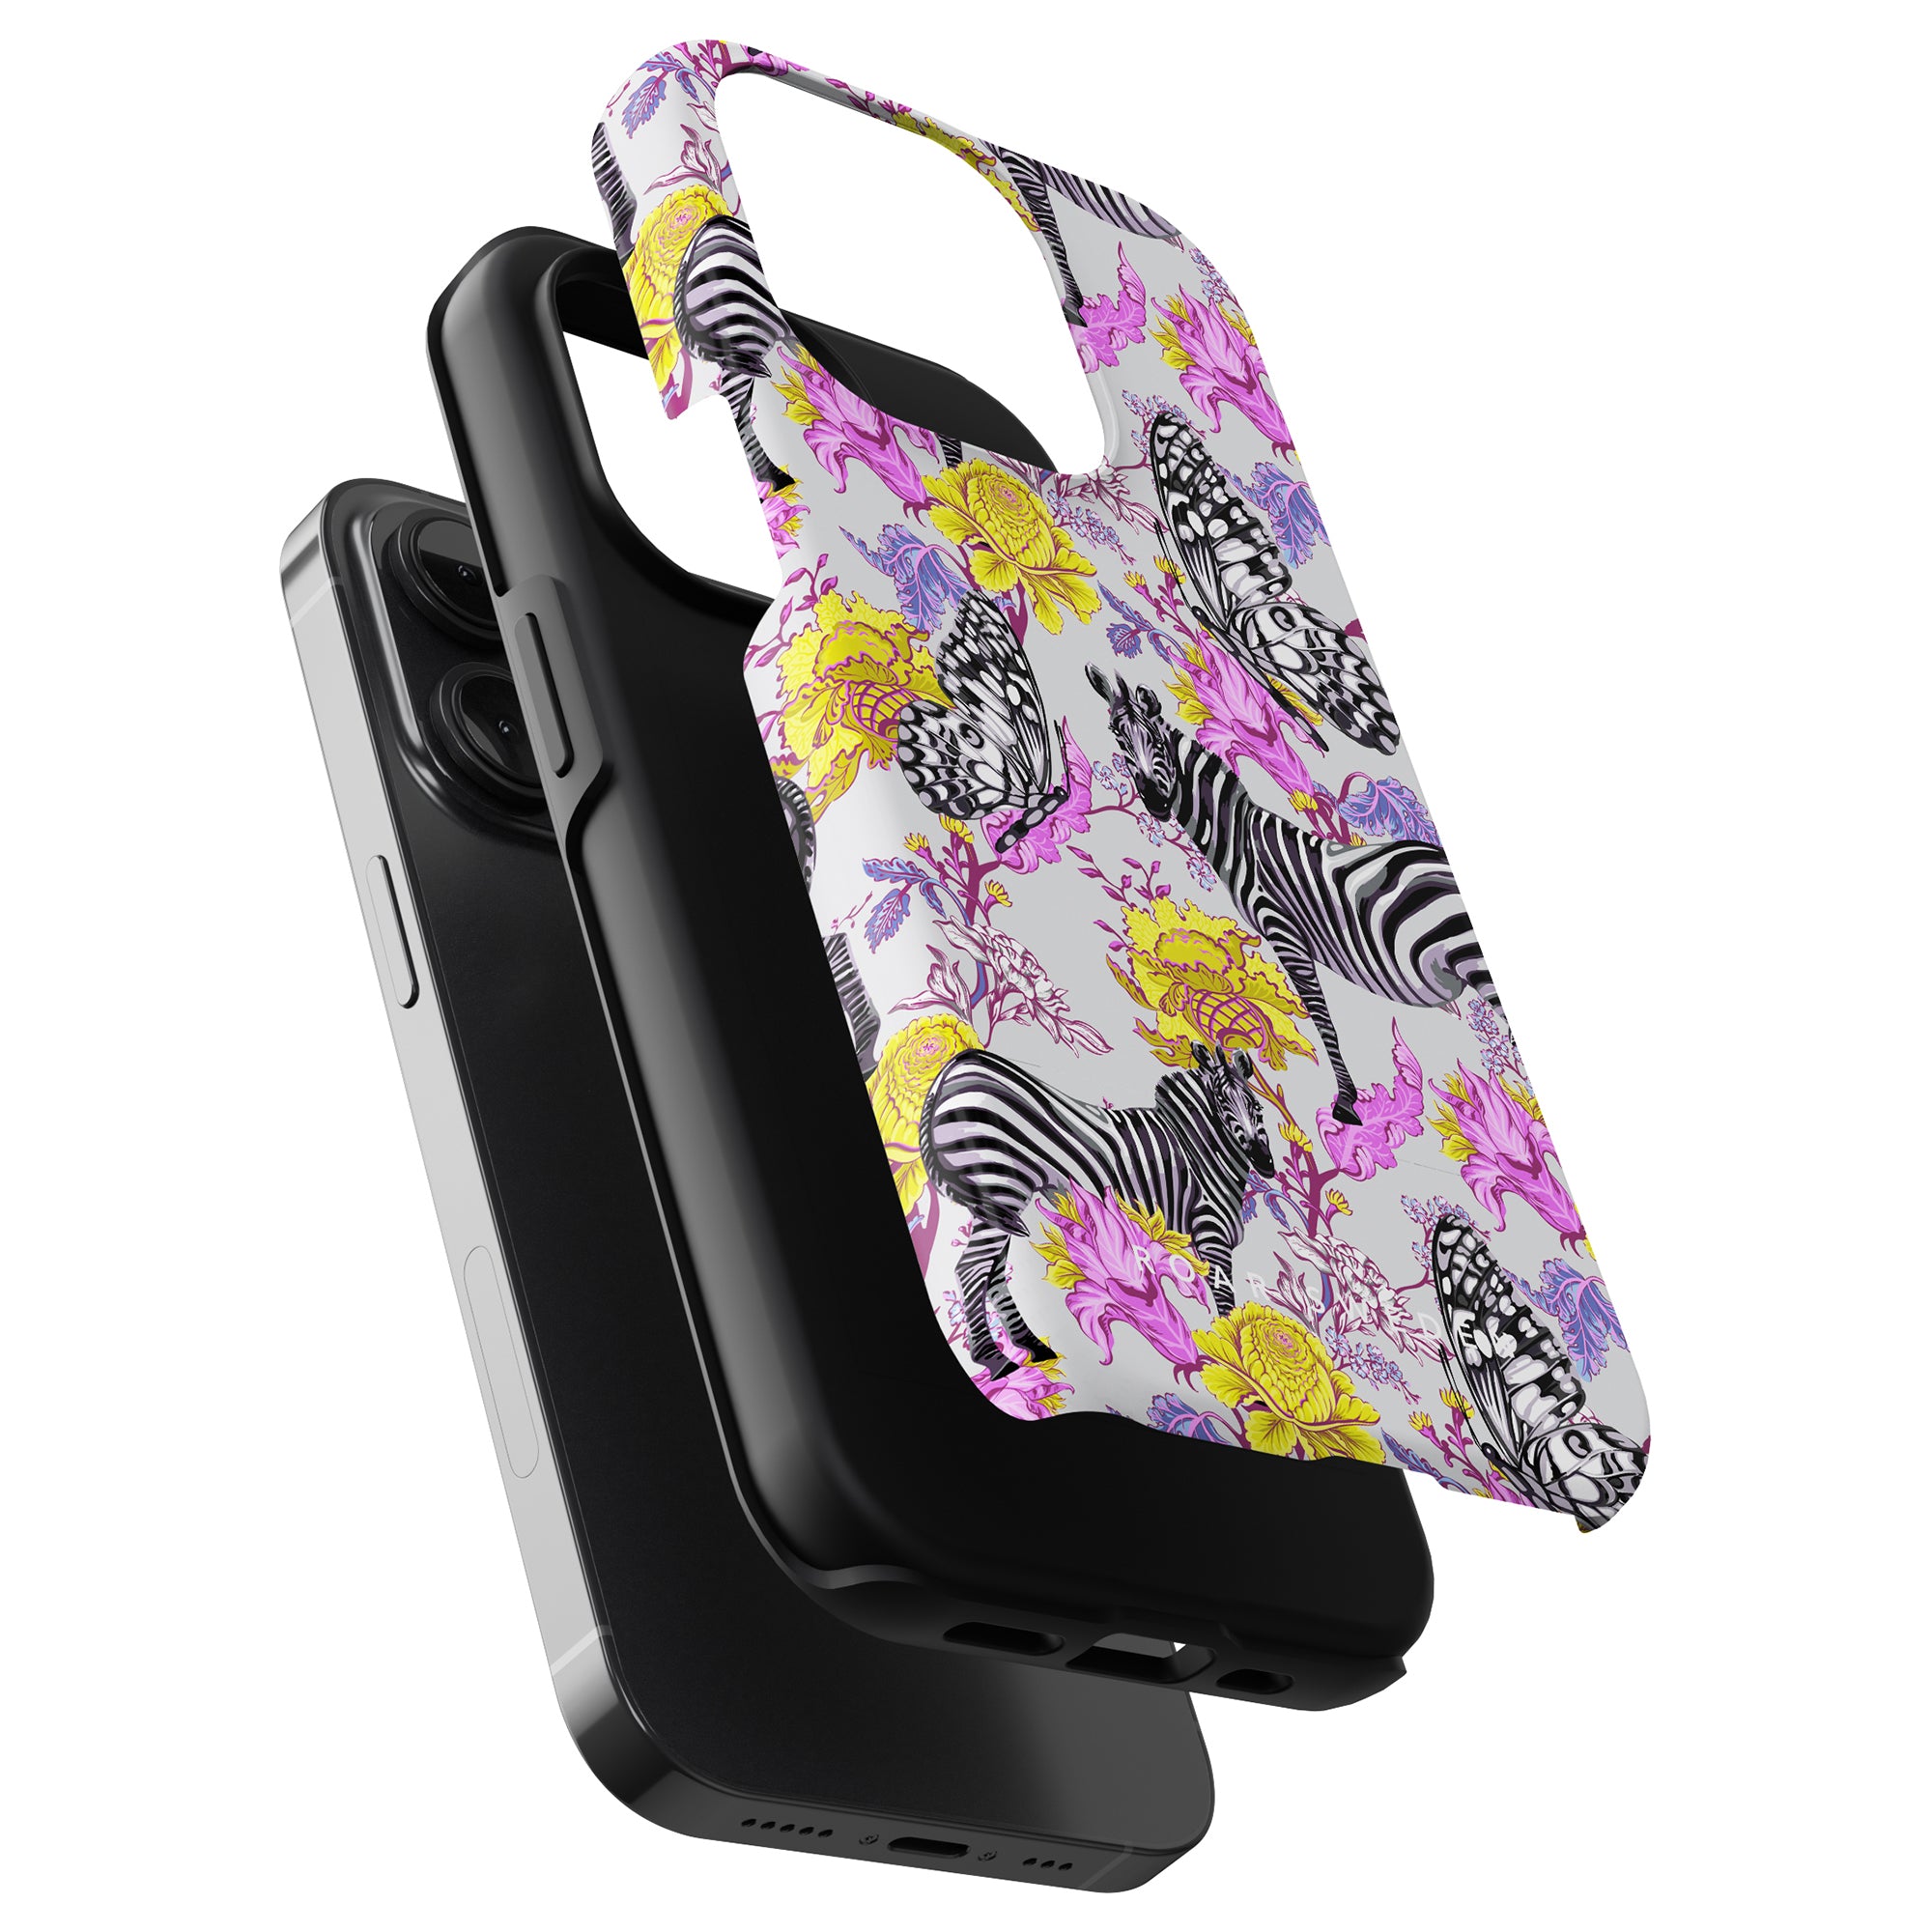 Smartphone with a floral and Exotic Zebra - Tough Case on a wireless charging stand.